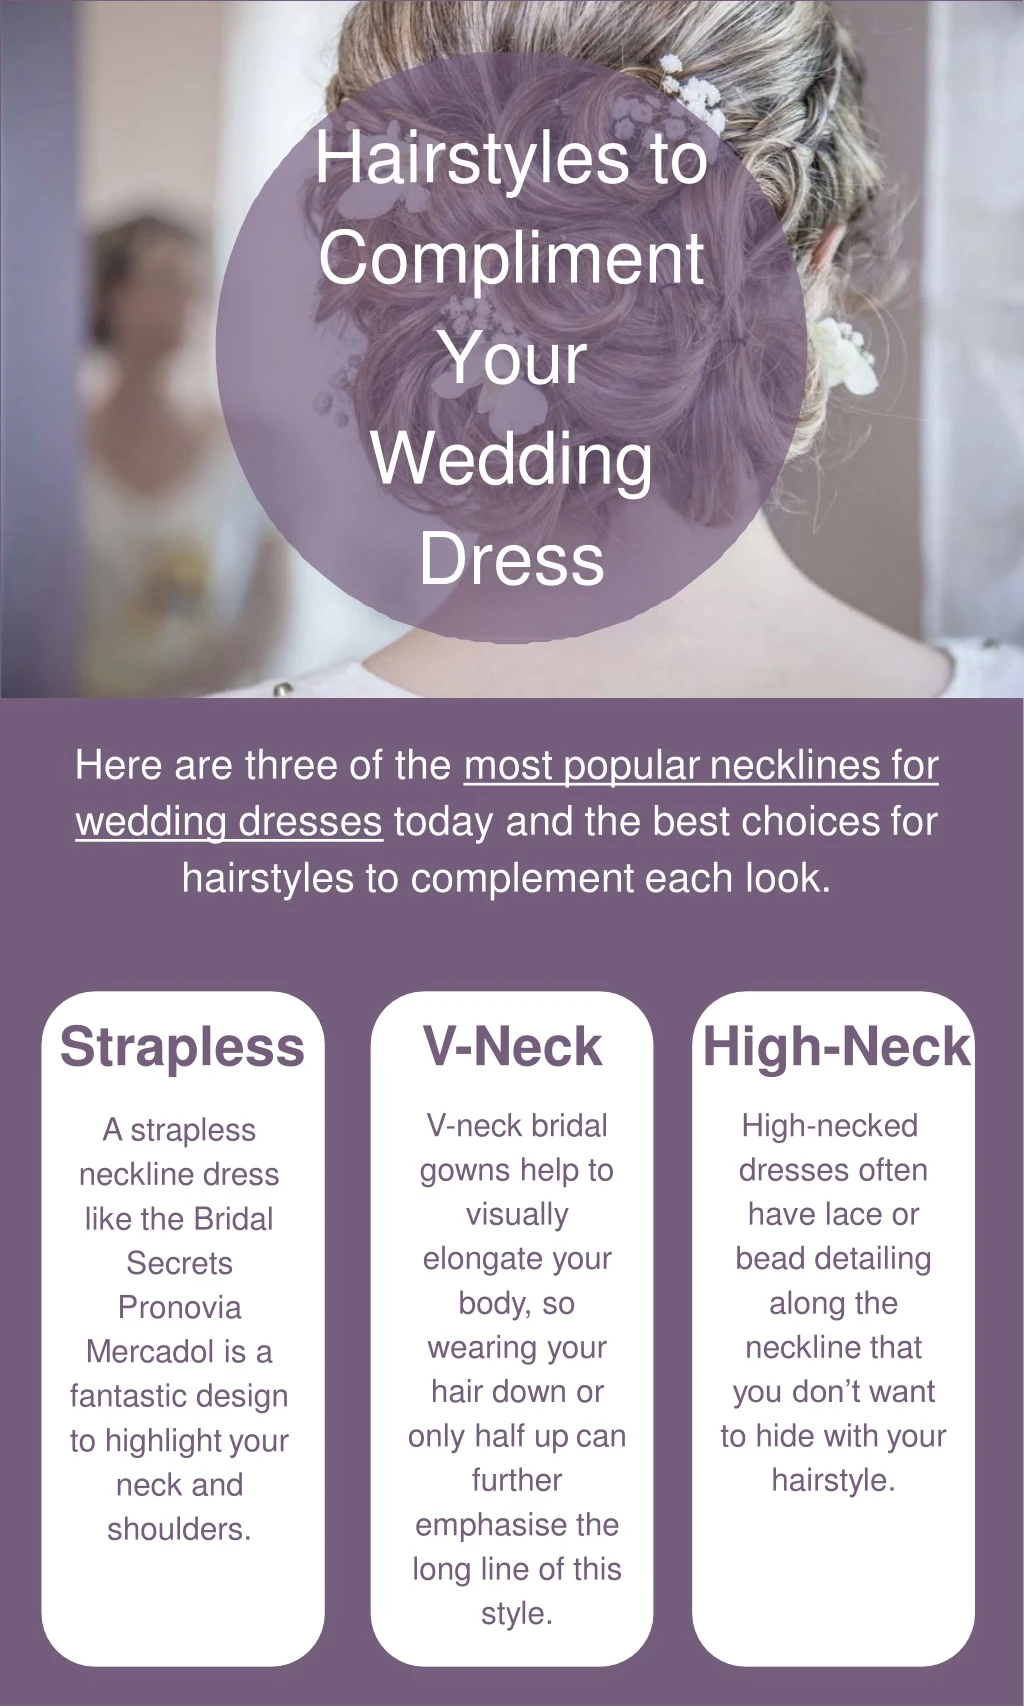 hairstyles to compliment your wedding dress